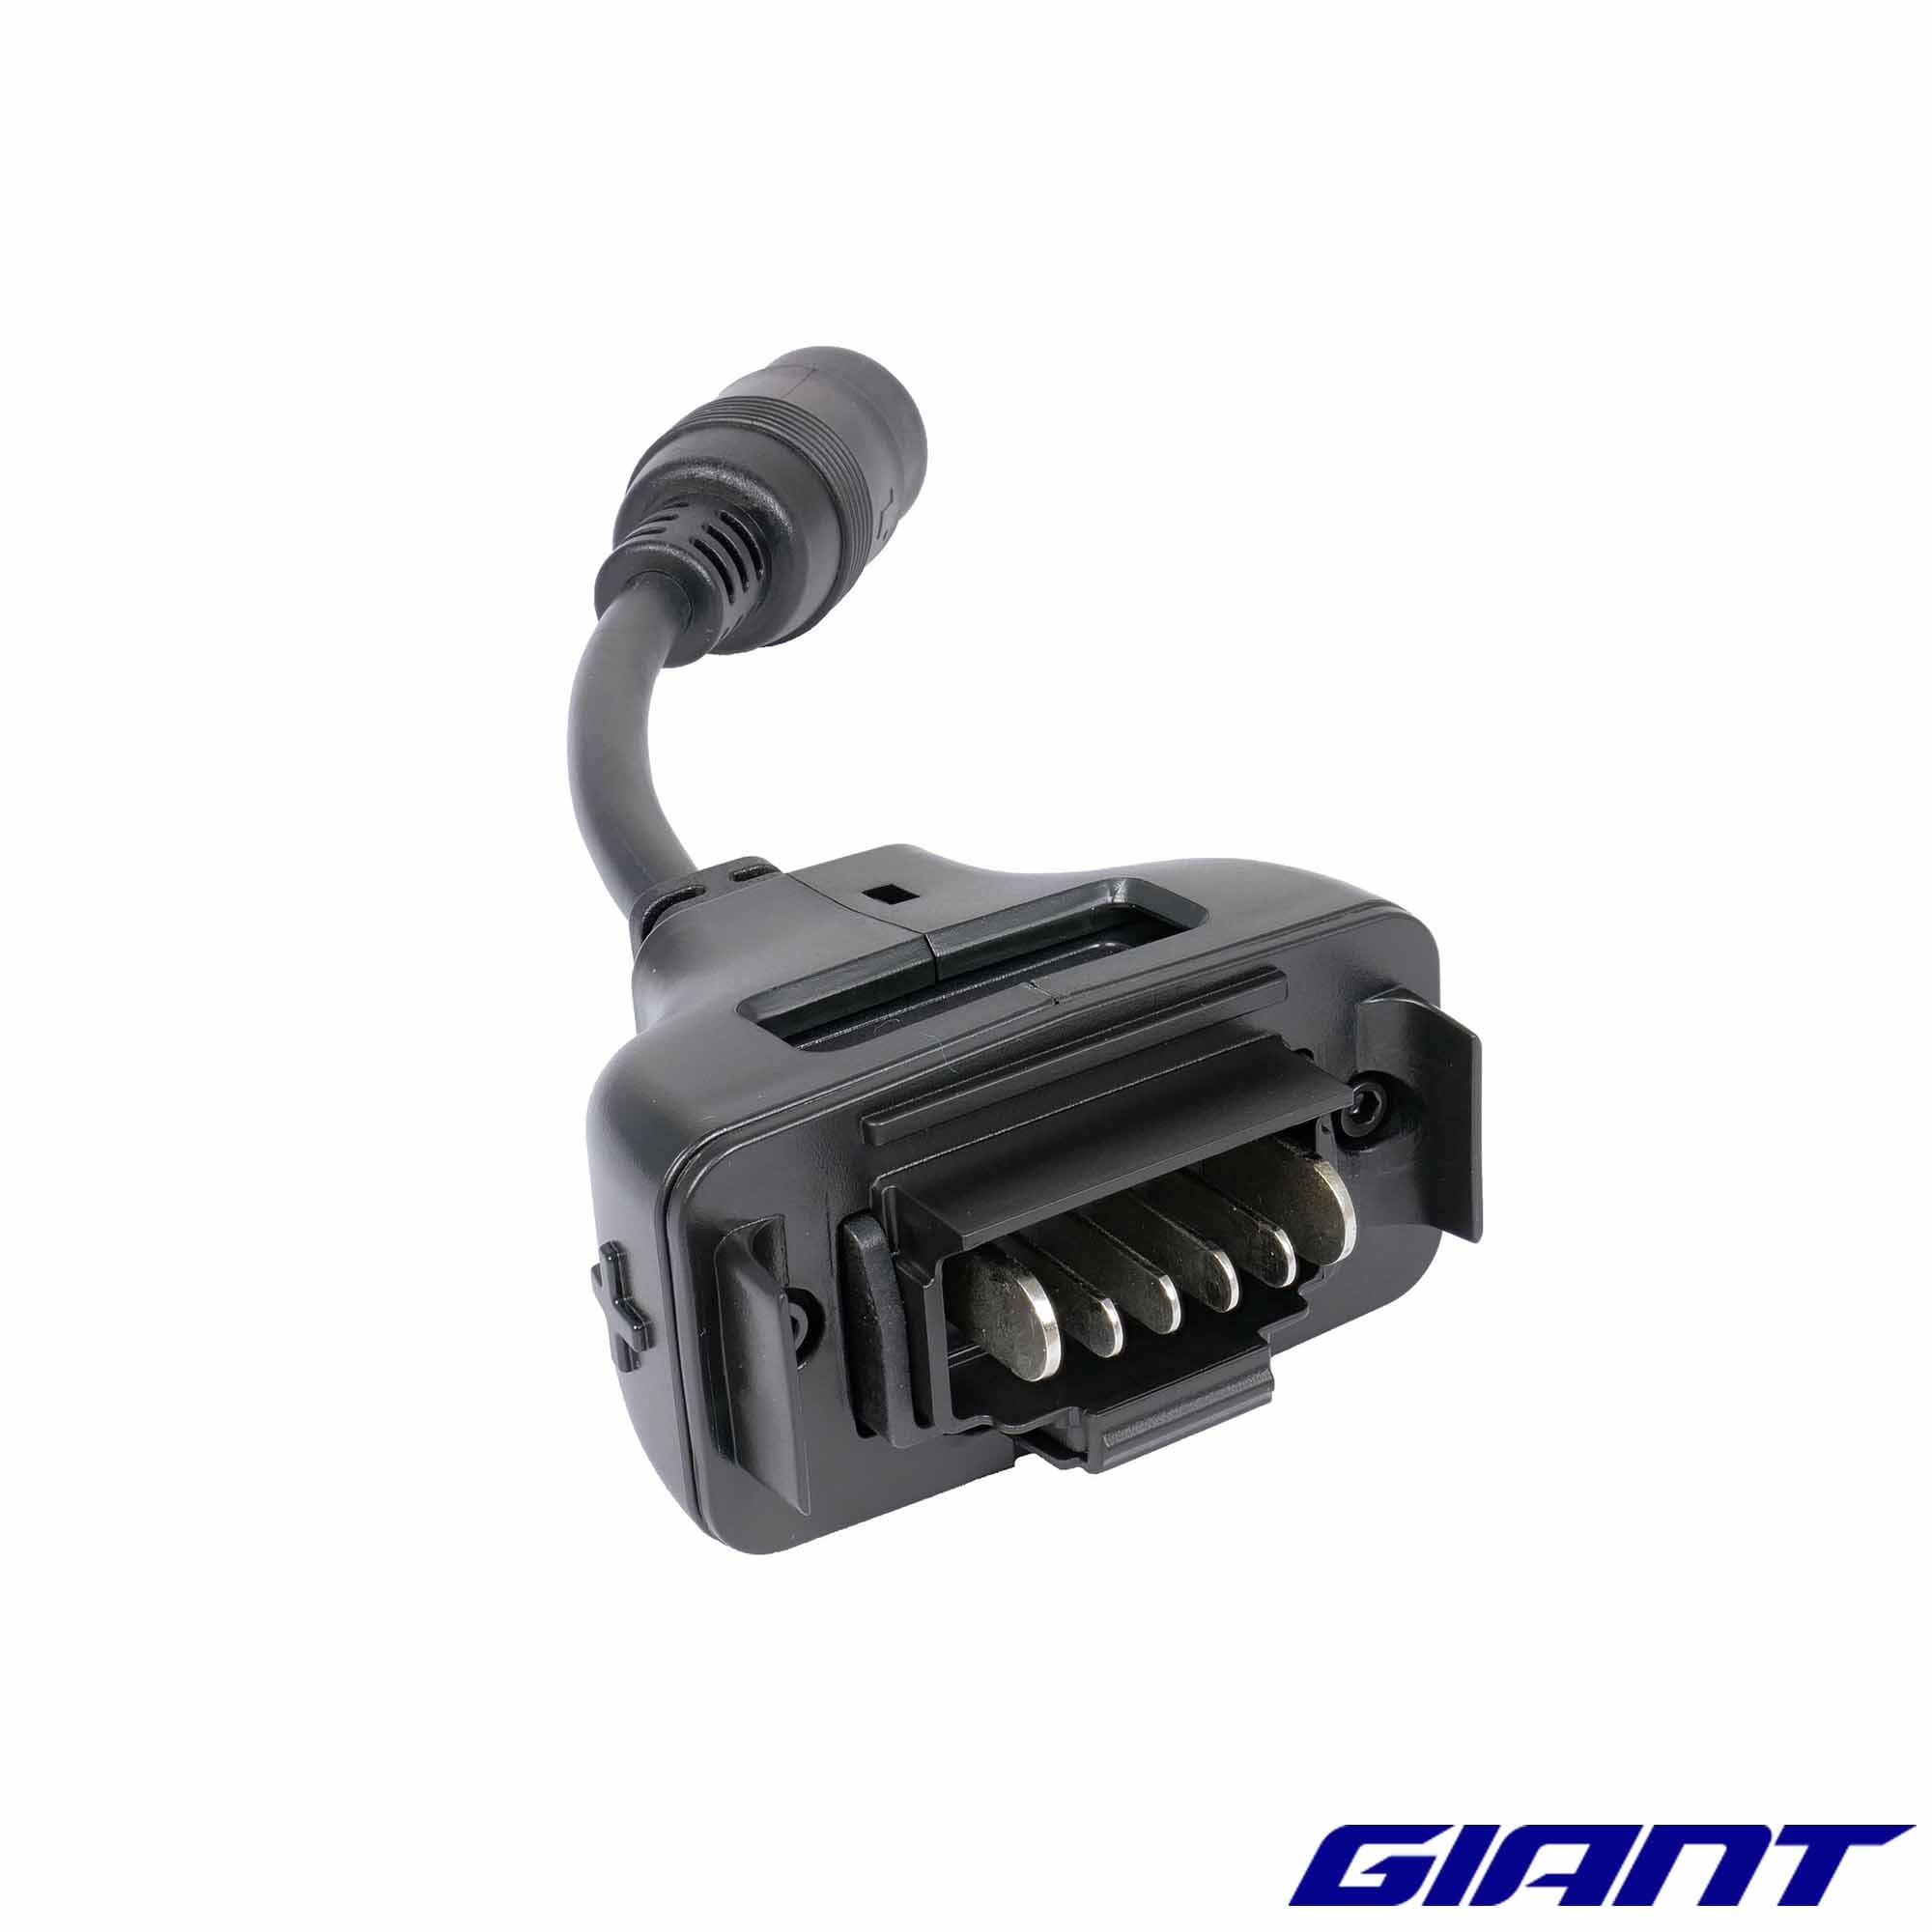 Adaptateur GIANT 6 broches pour Smart Chargeur